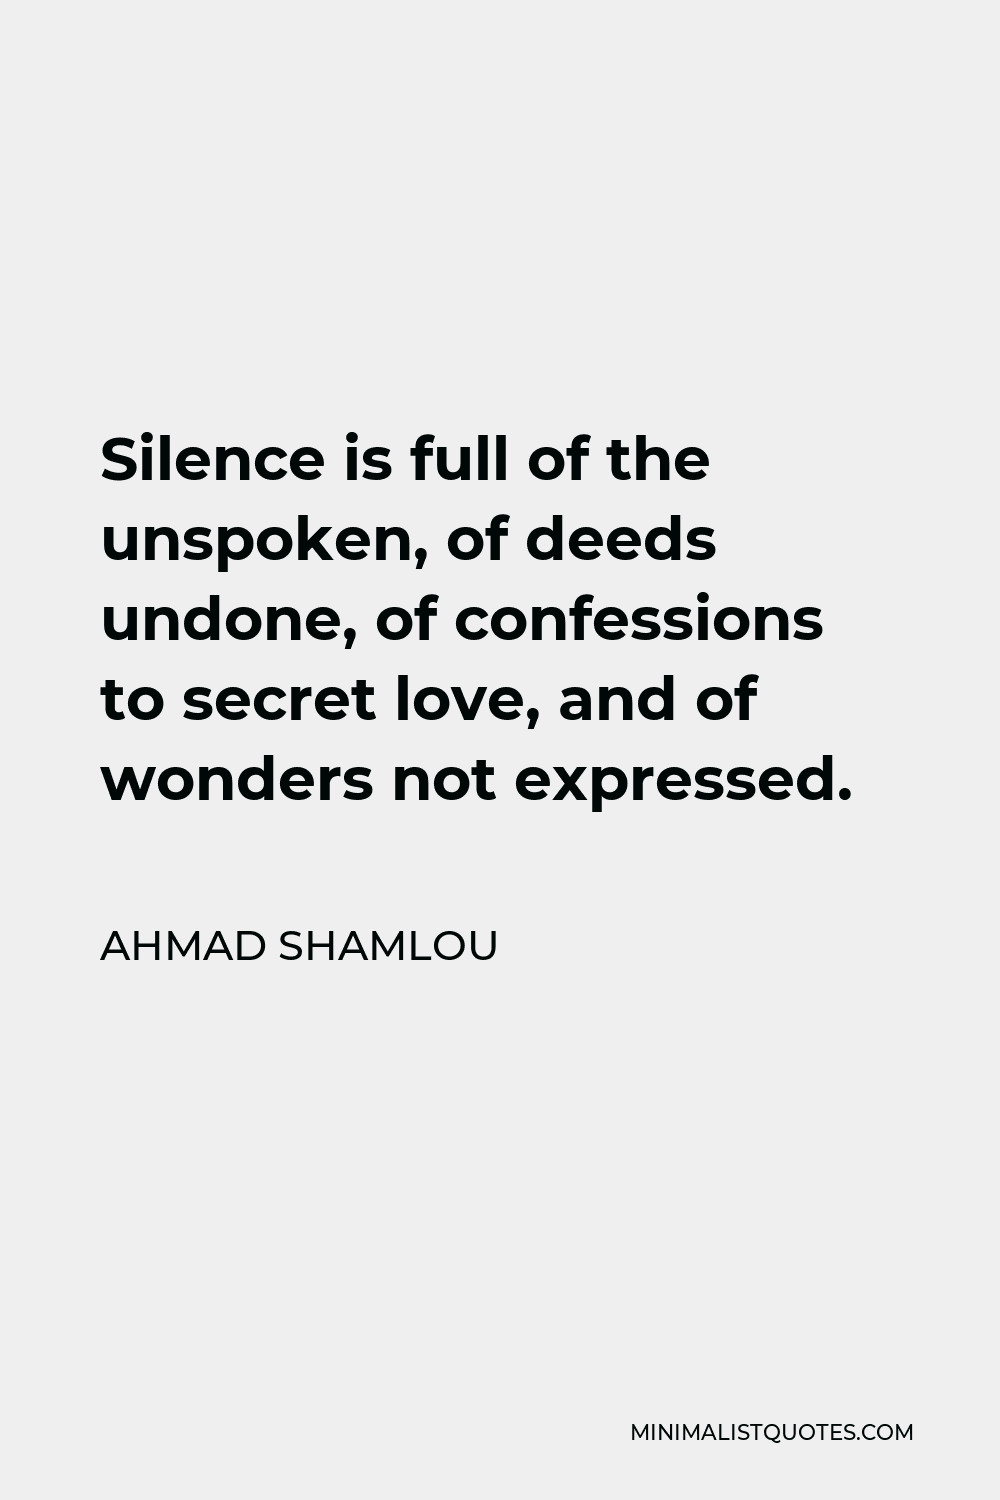 Ahmad Shamlou Quote - Silence is full of the unspoken, of deeds undone, of confessions to secret love, and of wonders not expressed.